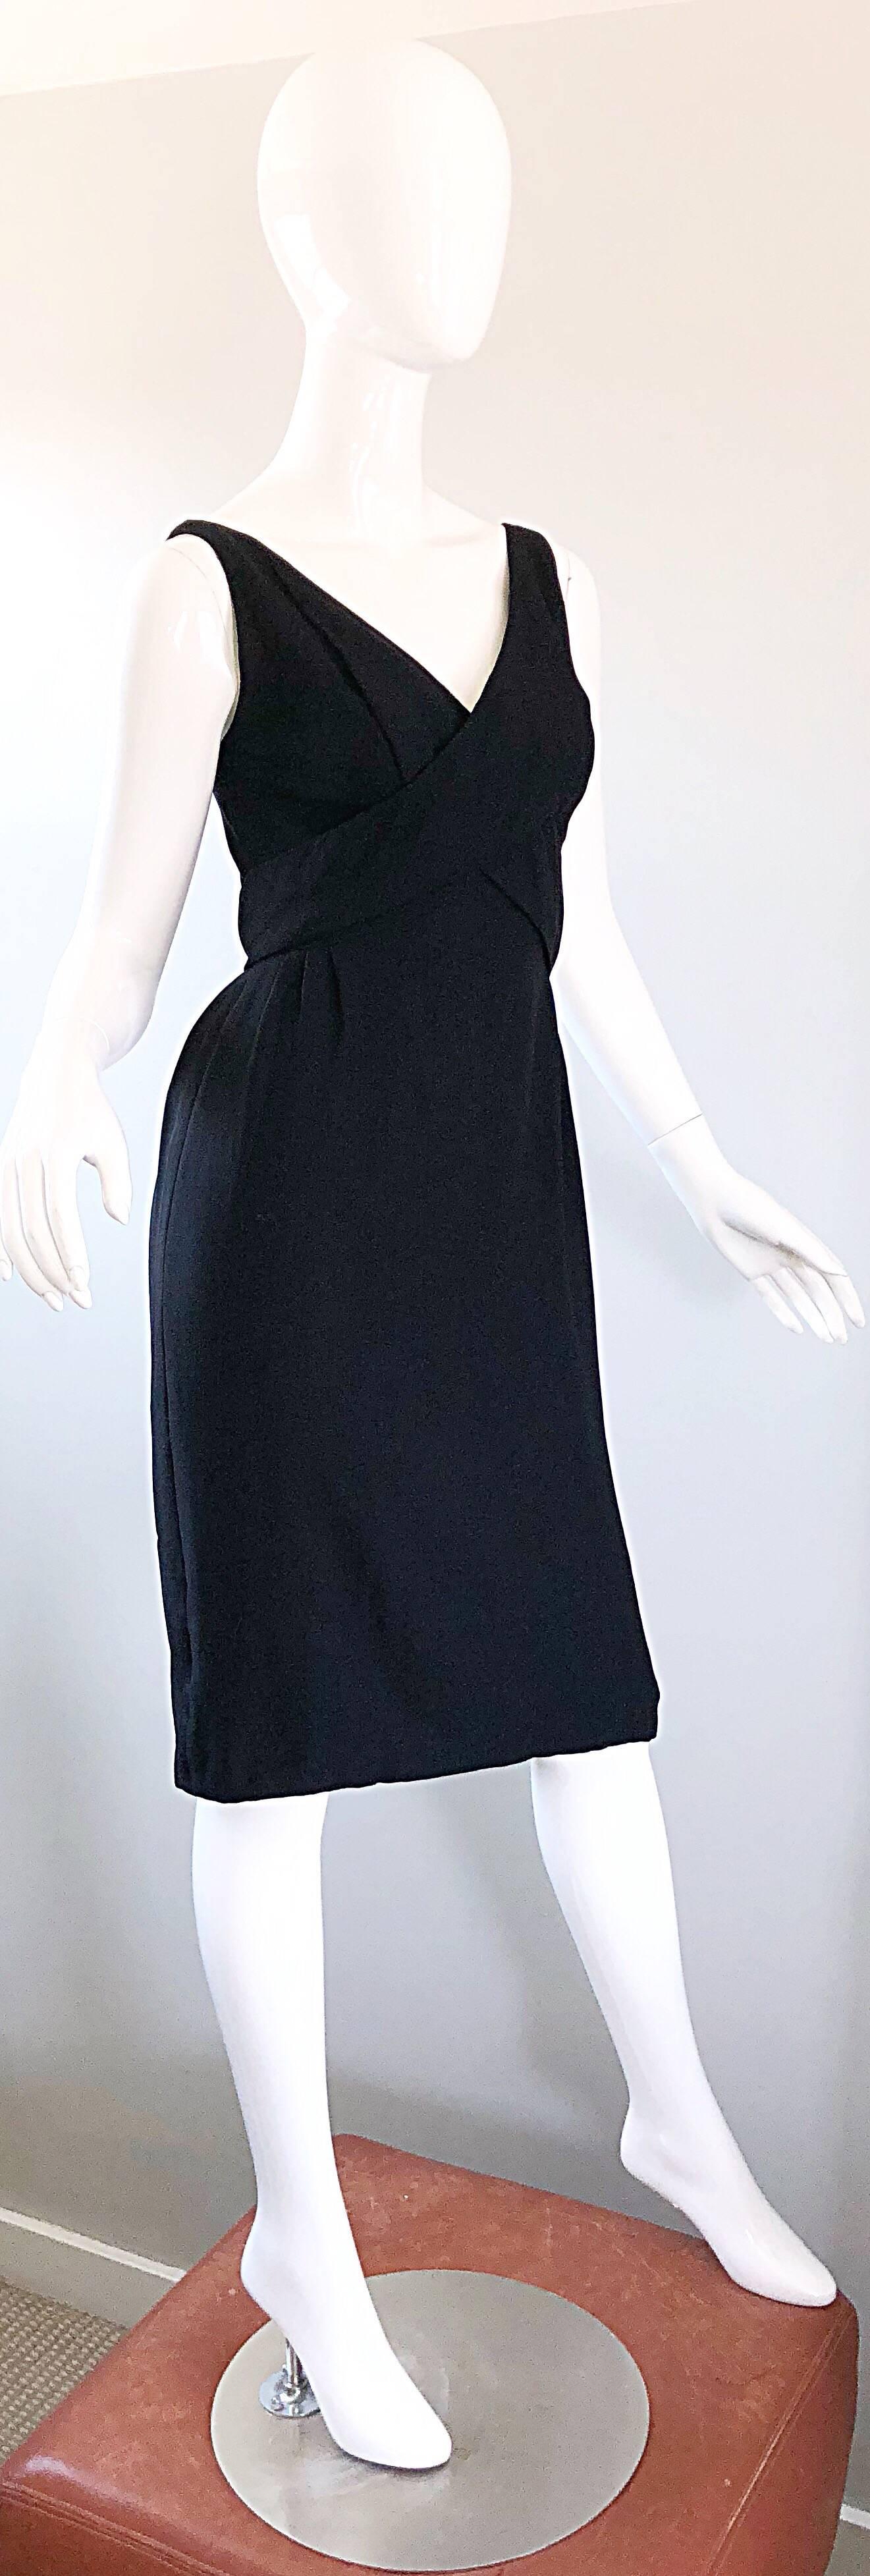 1950s Chic Crepe Sleeveless Perfect Vintage 50s Little Black Sheath Dress In Excellent Condition For Sale In San Diego, CA